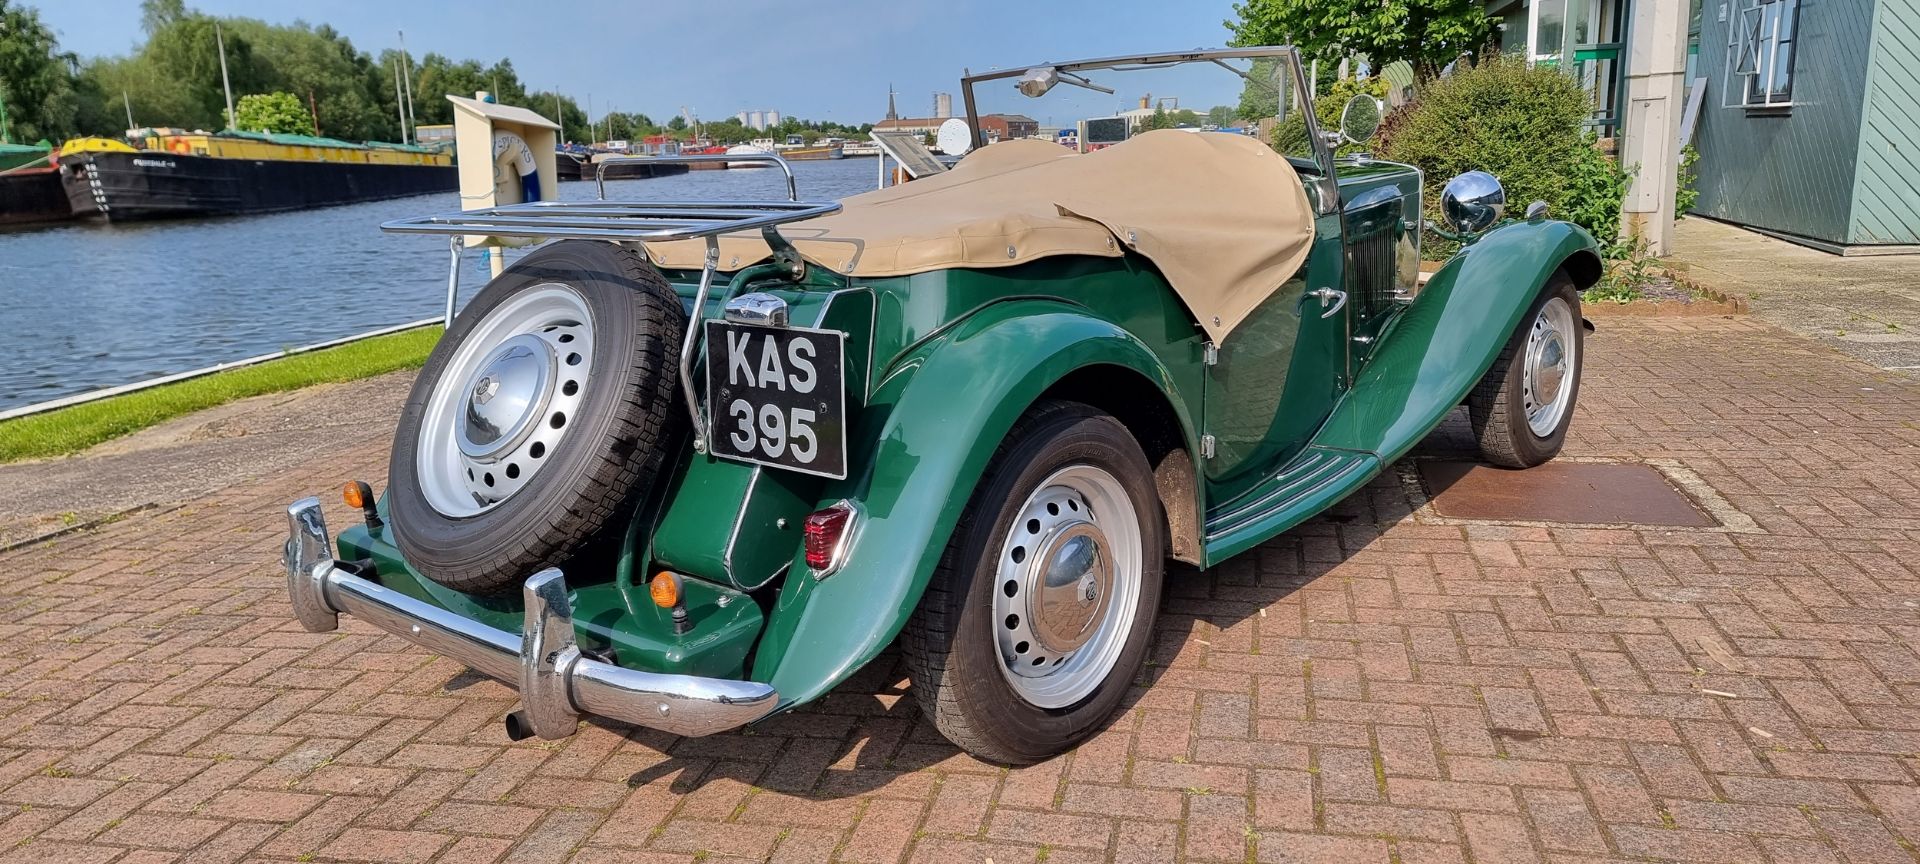 1951 MG TD/C, Mk 2, 1250cc. Registration number KAS 395 (non transferrable). Chassis number TD/ - Image 4 of 20